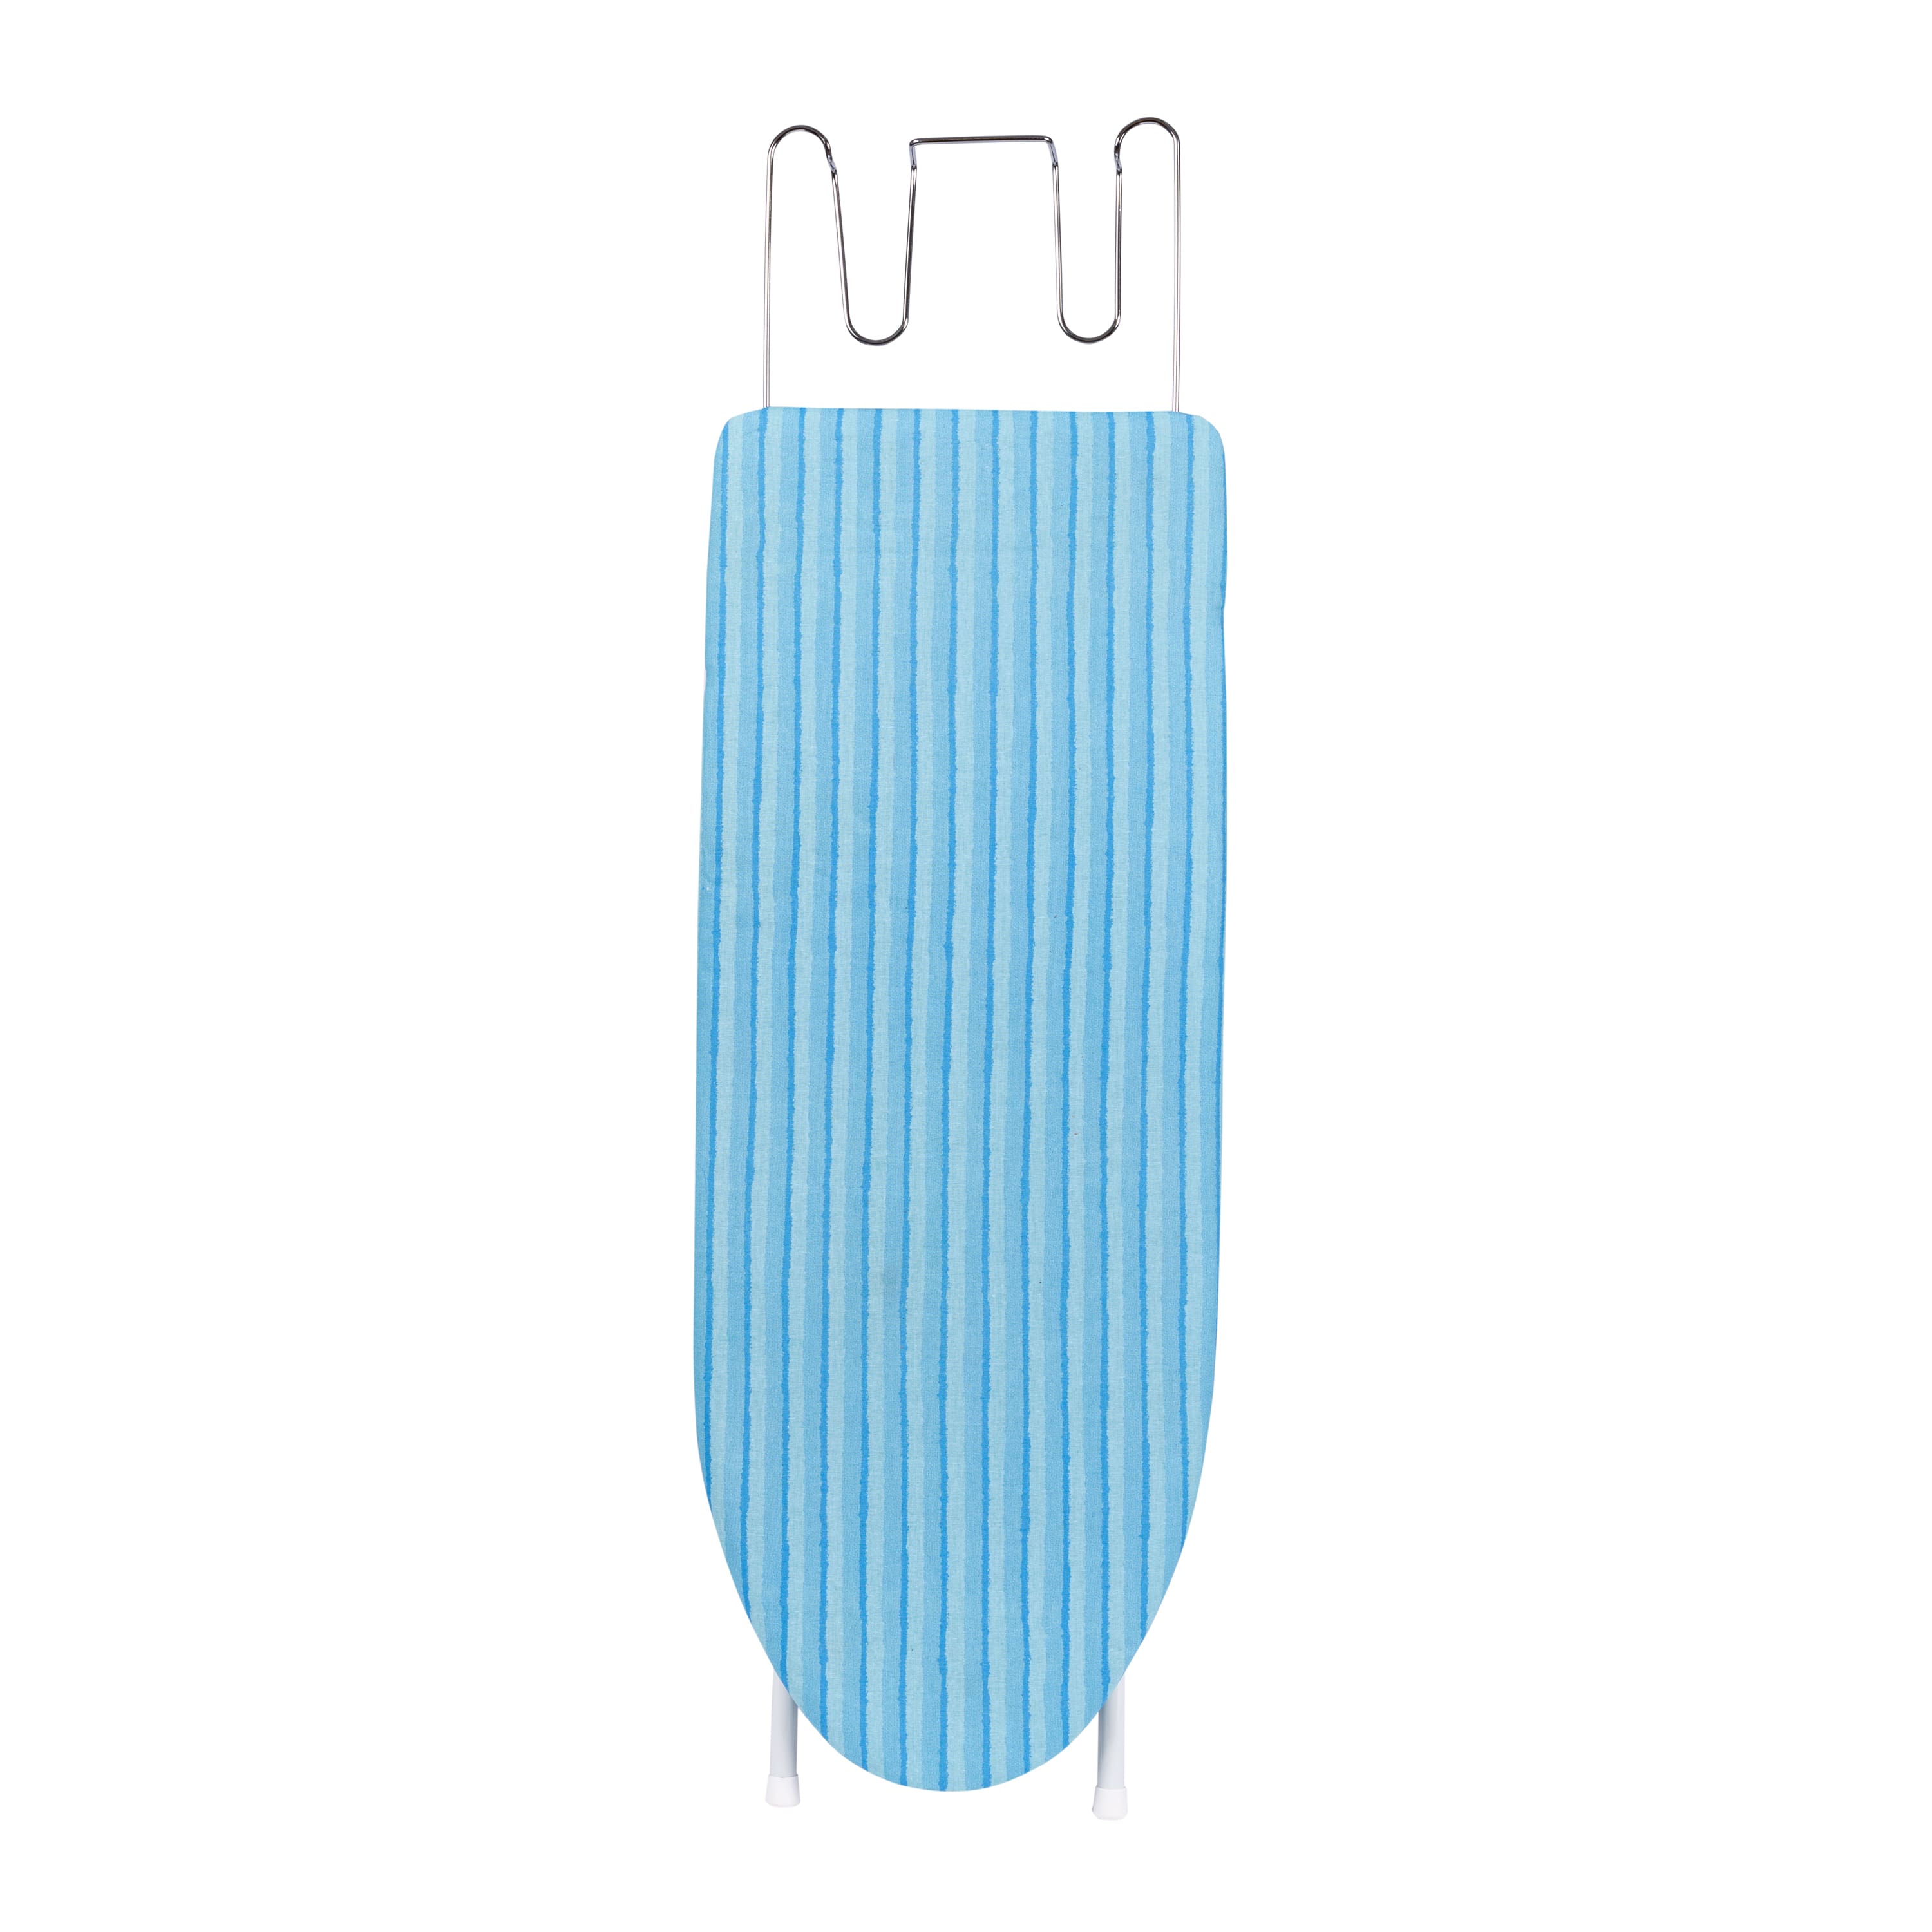 Honey Can Do Tabletop Ironing Board w/ Retractable Iron Rest